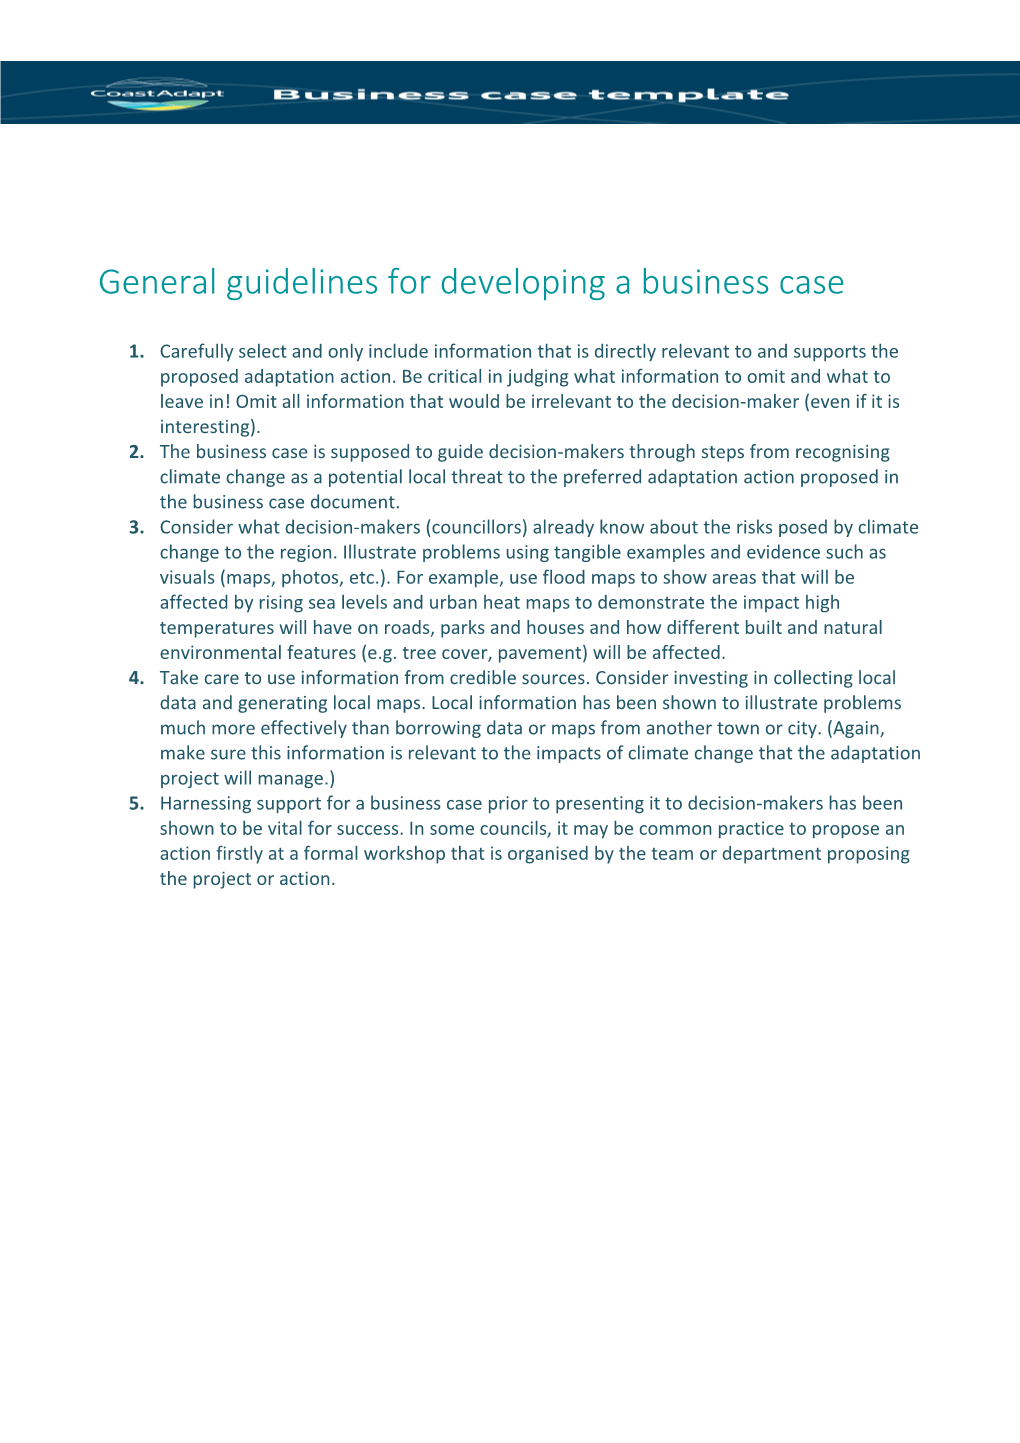 General Guidelines for Developing a Business Case